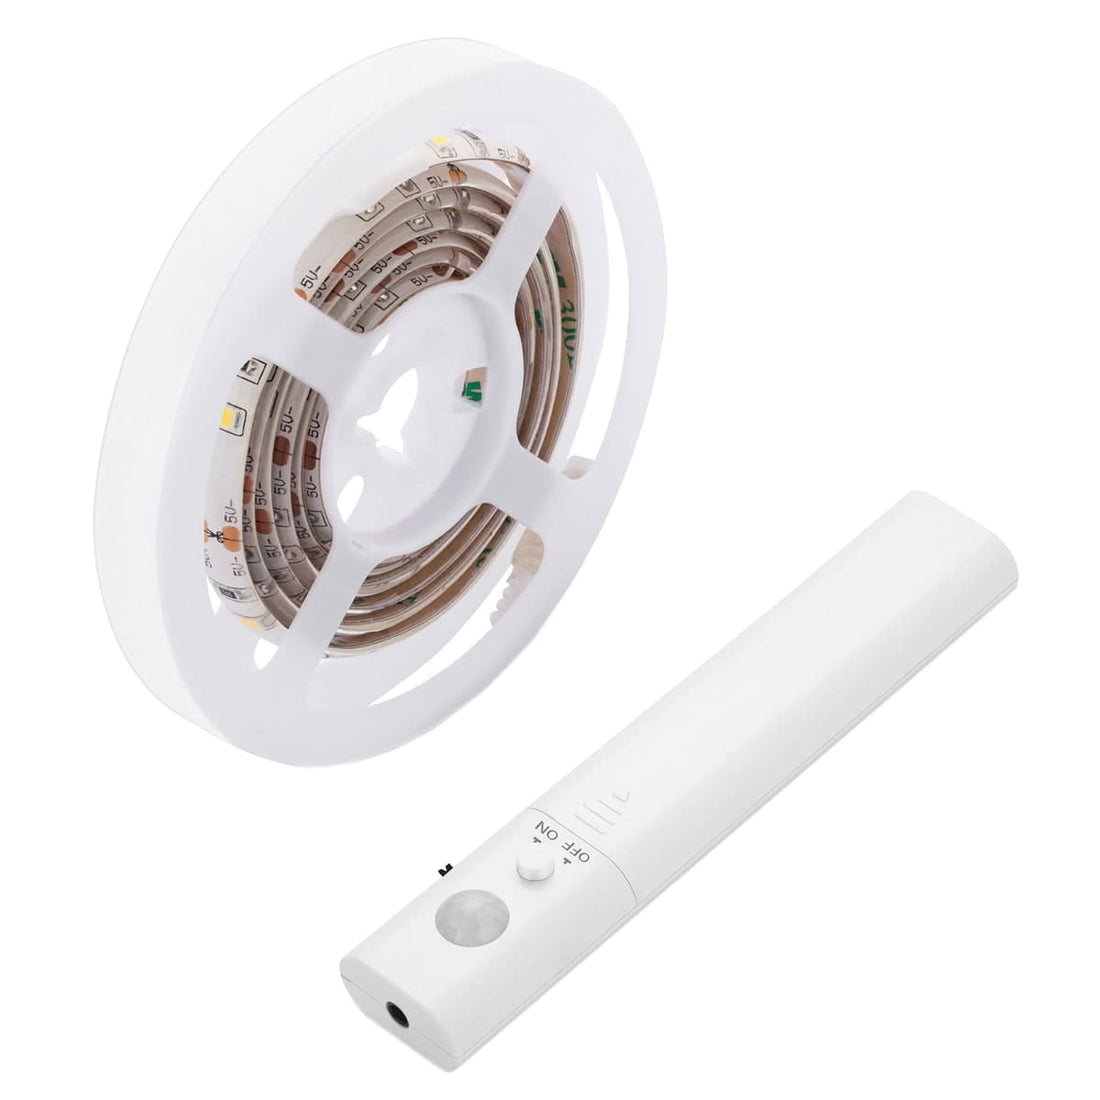 LED STRIP KIT 1MT 2,4W DAYLIGHT BATTERY OPERATED WITH MOTION SENSOR IP65 - best price from Maltashopper.com BR420007111